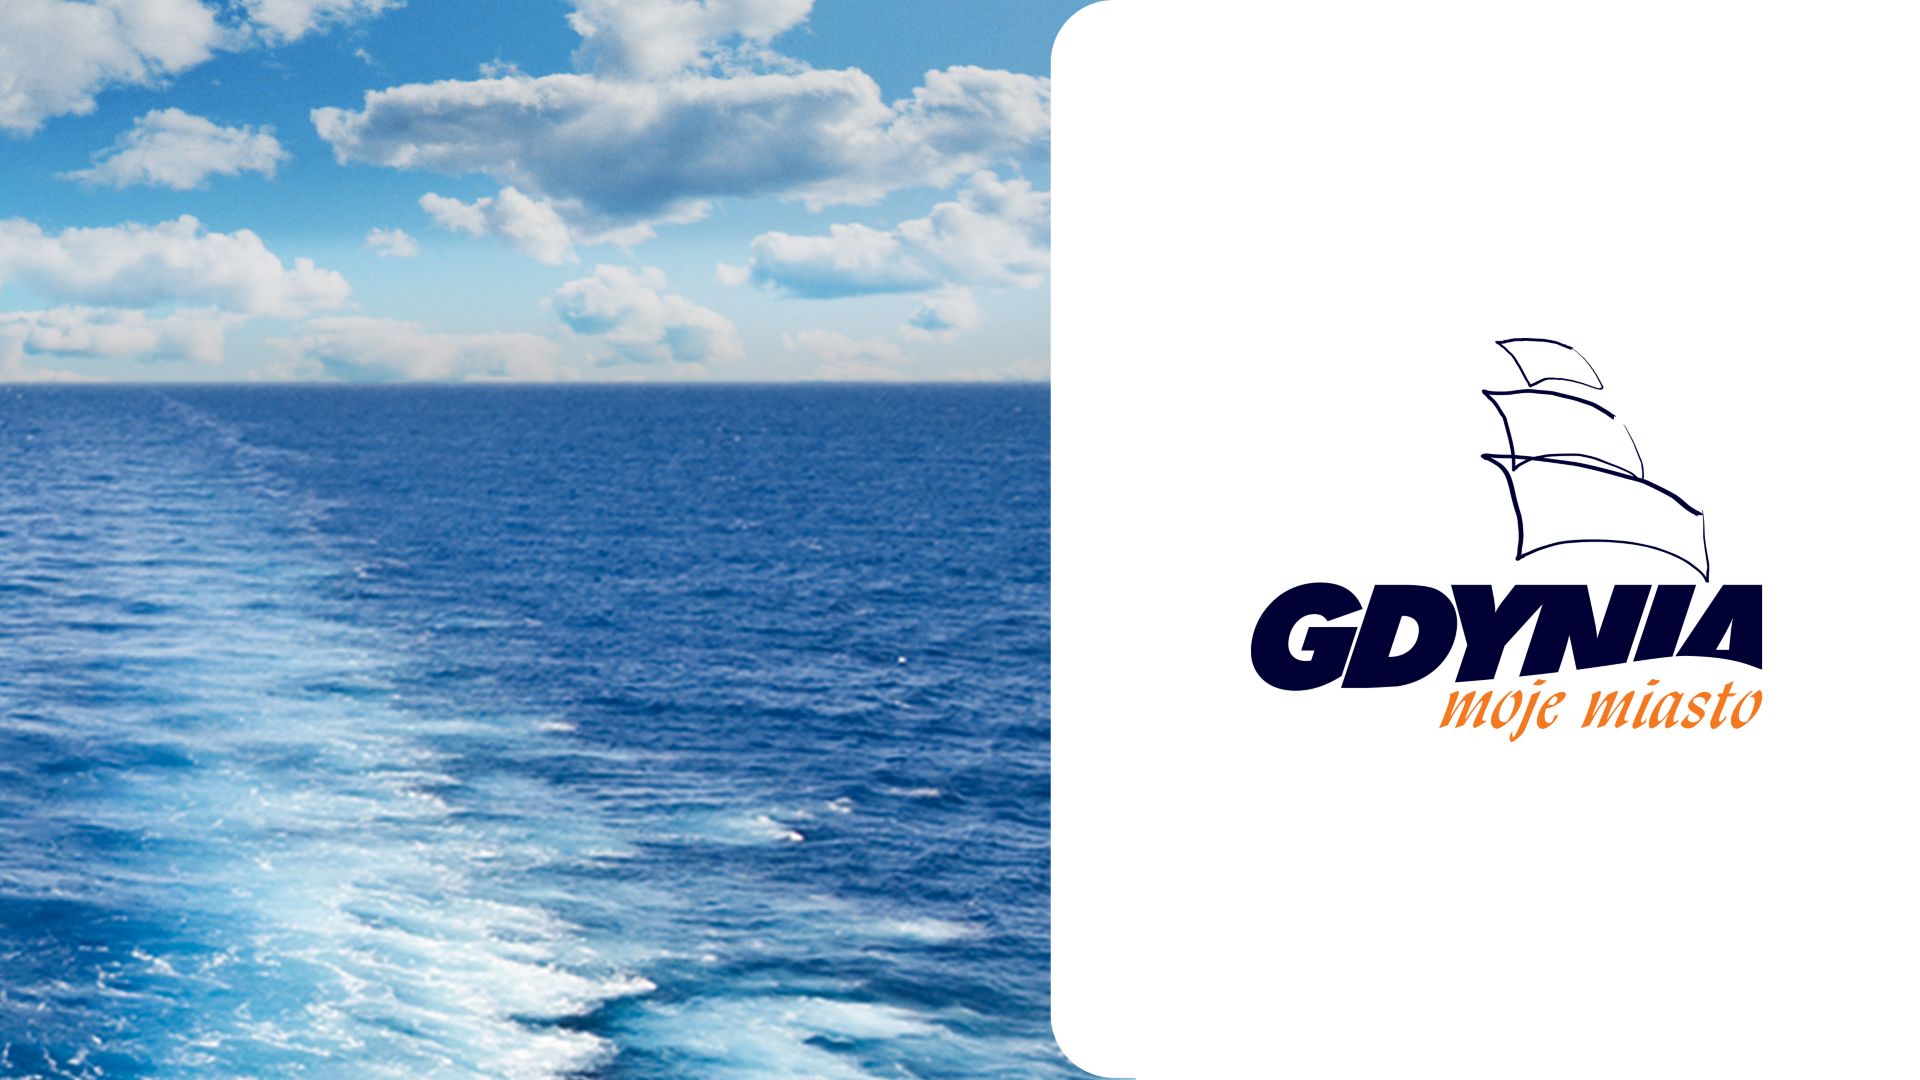 Special offers for Gdynia citizens